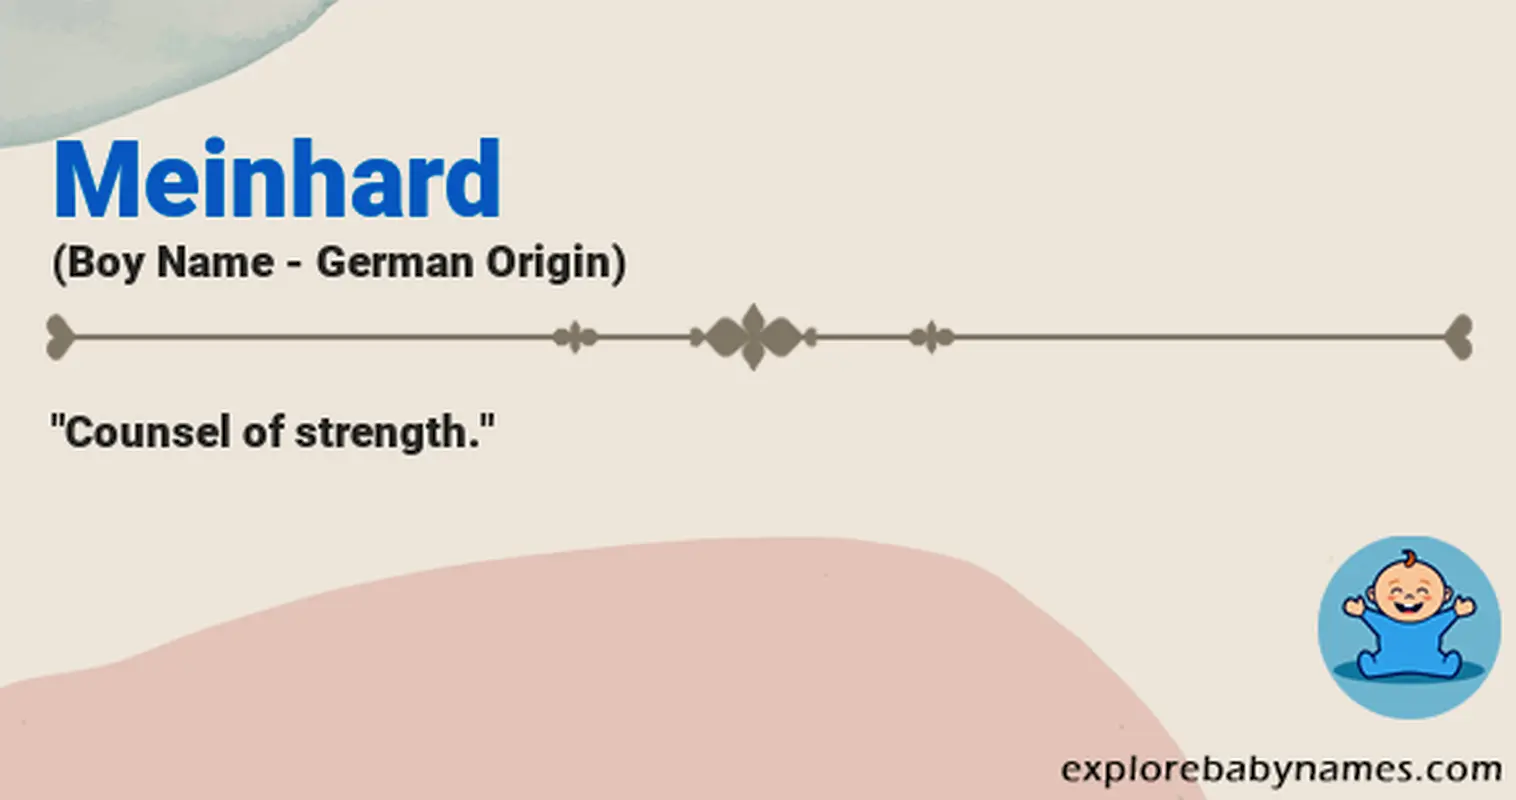 Meaning of Meinhard